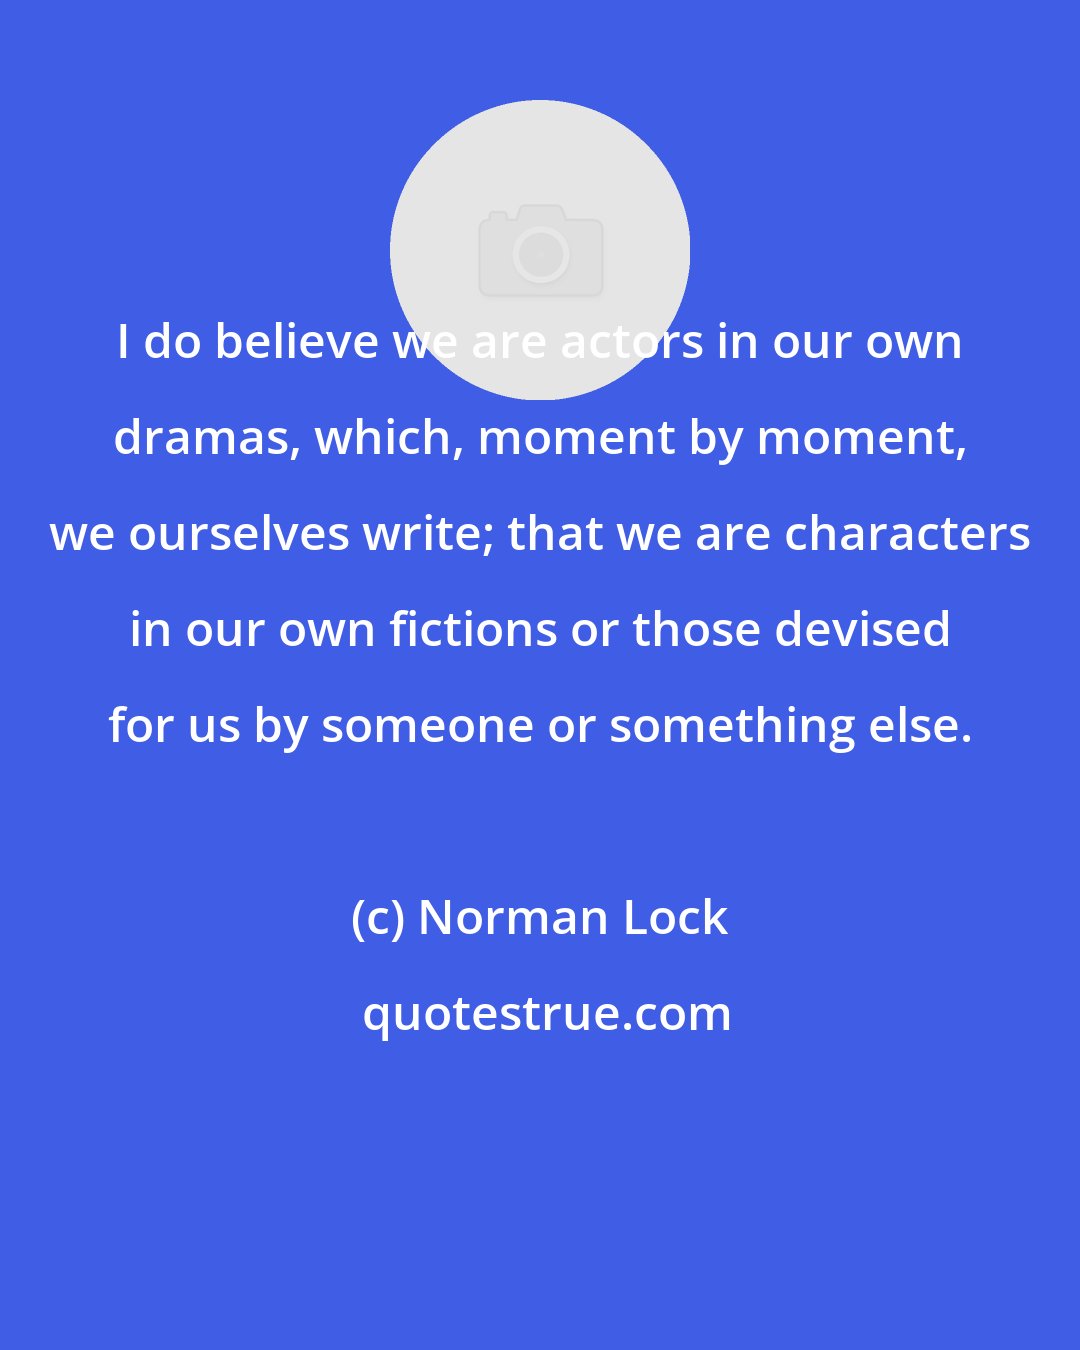 Norman Lock: I do believe we are actors in our own dramas, which, moment by moment, we ourselves write; that we are characters in our own fictions or those devised for us by someone or something else.